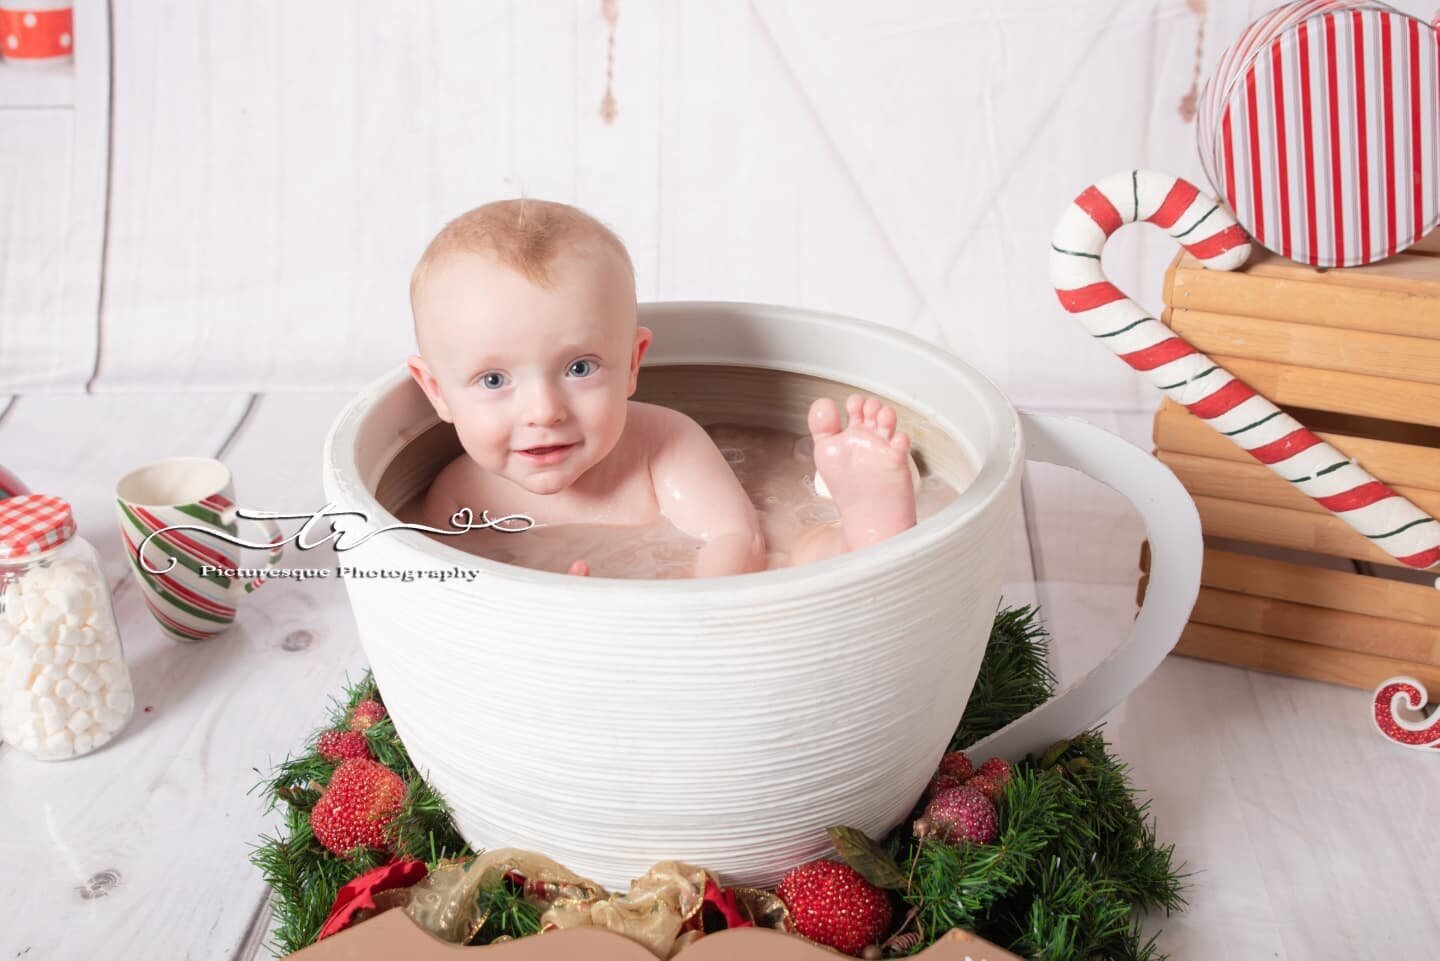 It's the toes for me 😅
.
#trpicturesque #hotcocoasessions #hotchocolate #hotcocoa #christmasphotos #sittersession #10months #10monthsold #adorable #santababy #marshmallow #candycane #baby #babyinacup #chunkybaby #winter #happiness